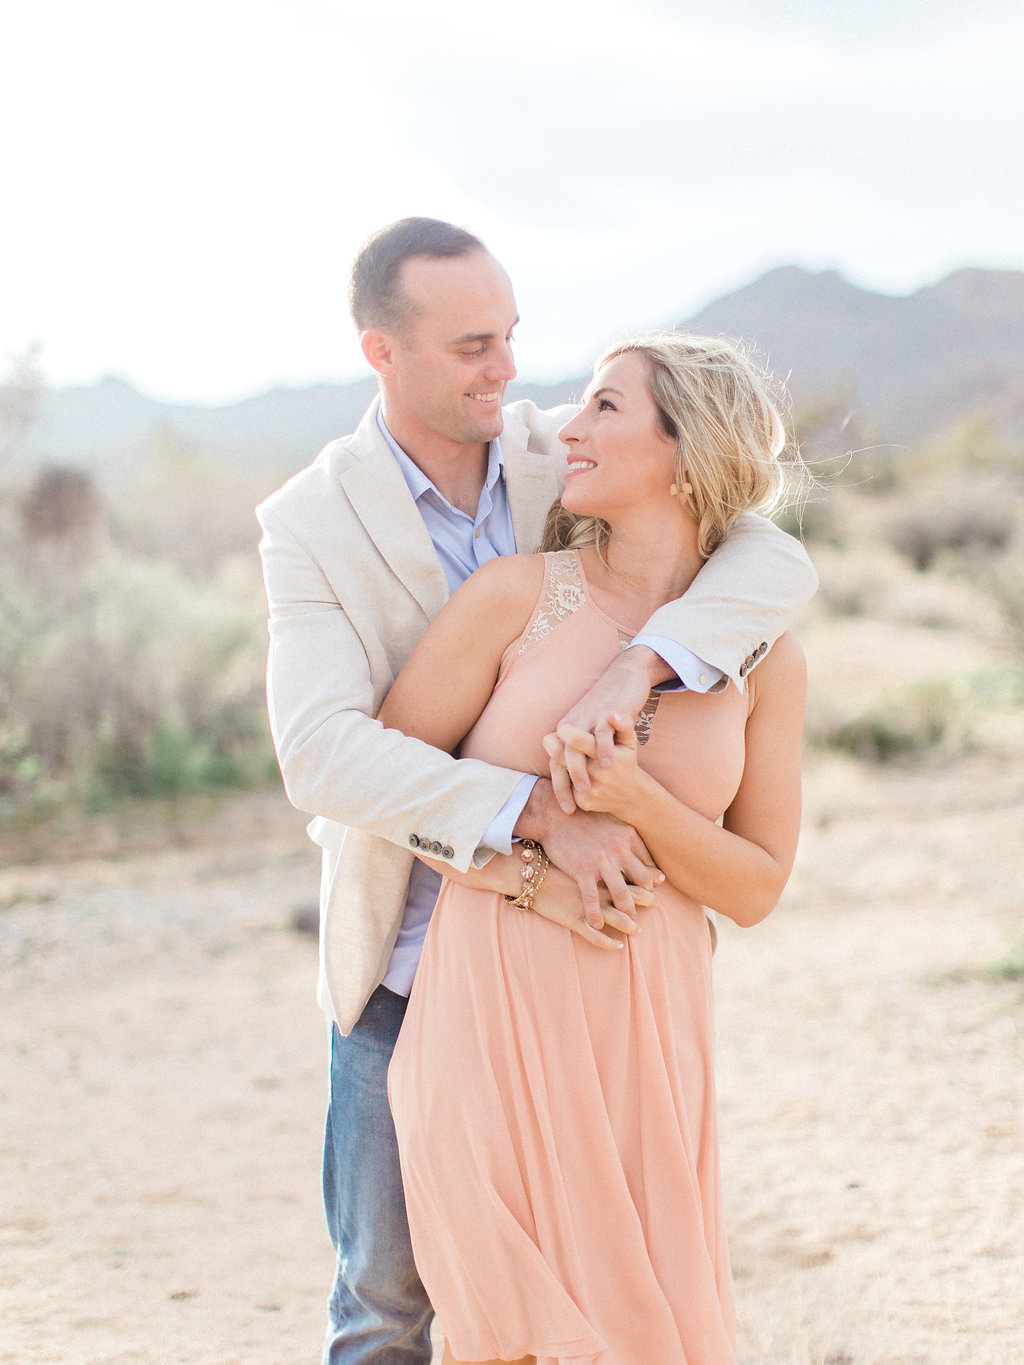 Joshua Tree Engagement Session | What to Wear for Pictures | Southern California Wedding Photographer | Mastin Labs Fuji Film | Fine Art Photographer | Desert Shoot | Couple in Love | Marine.jpg